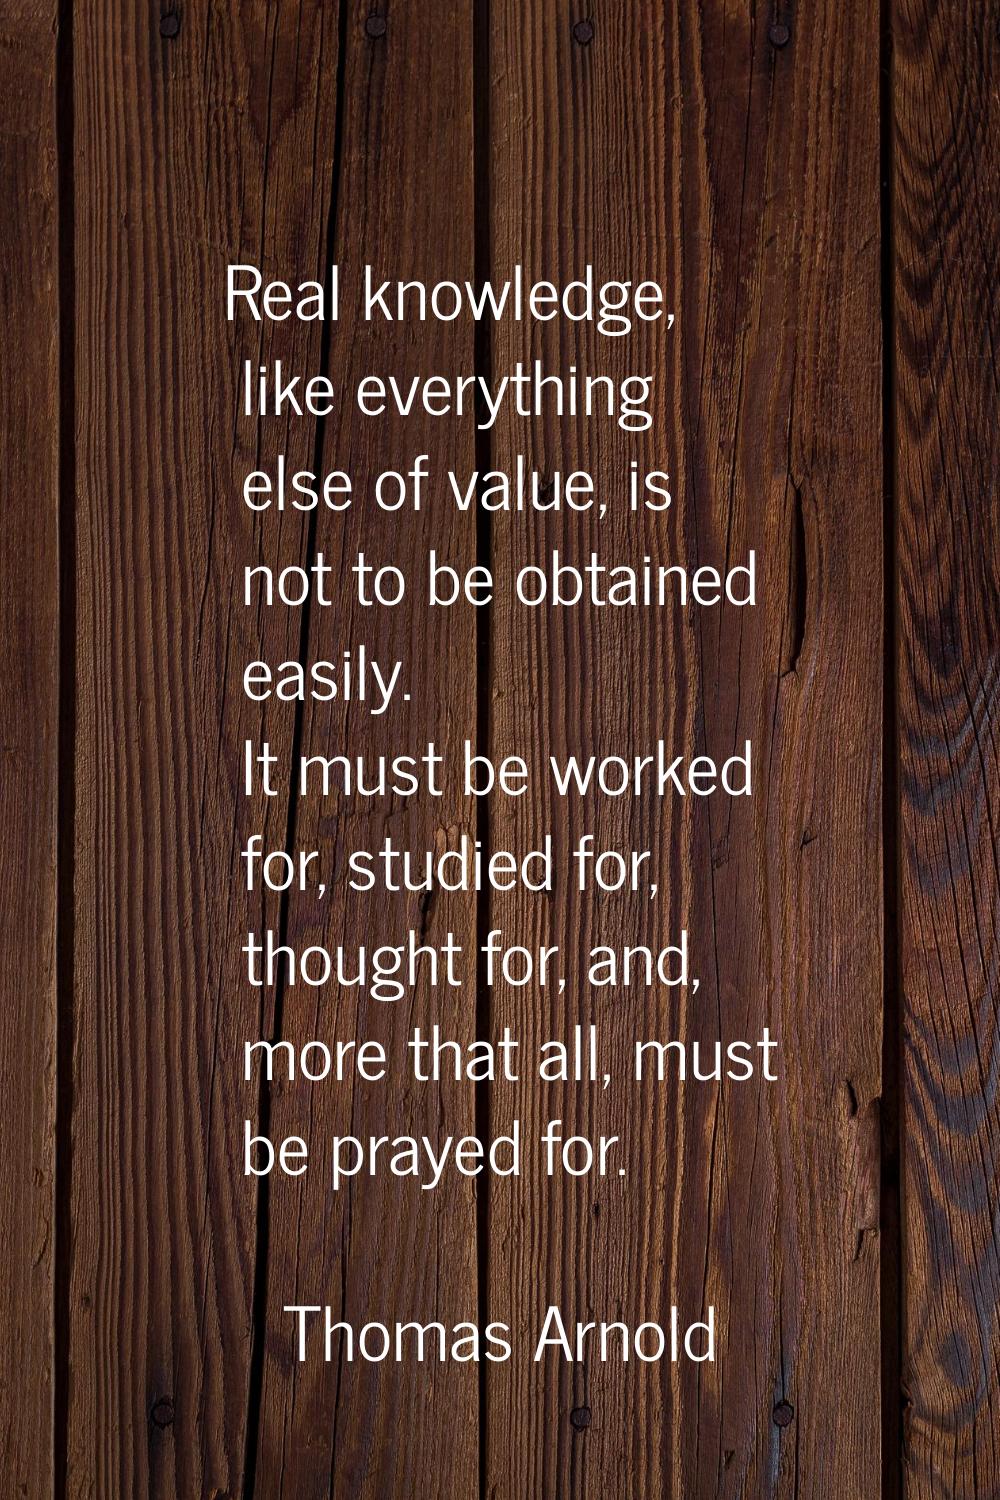 Real knowledge, like everything else of value, is not to be obtained easily. It must be worked for,